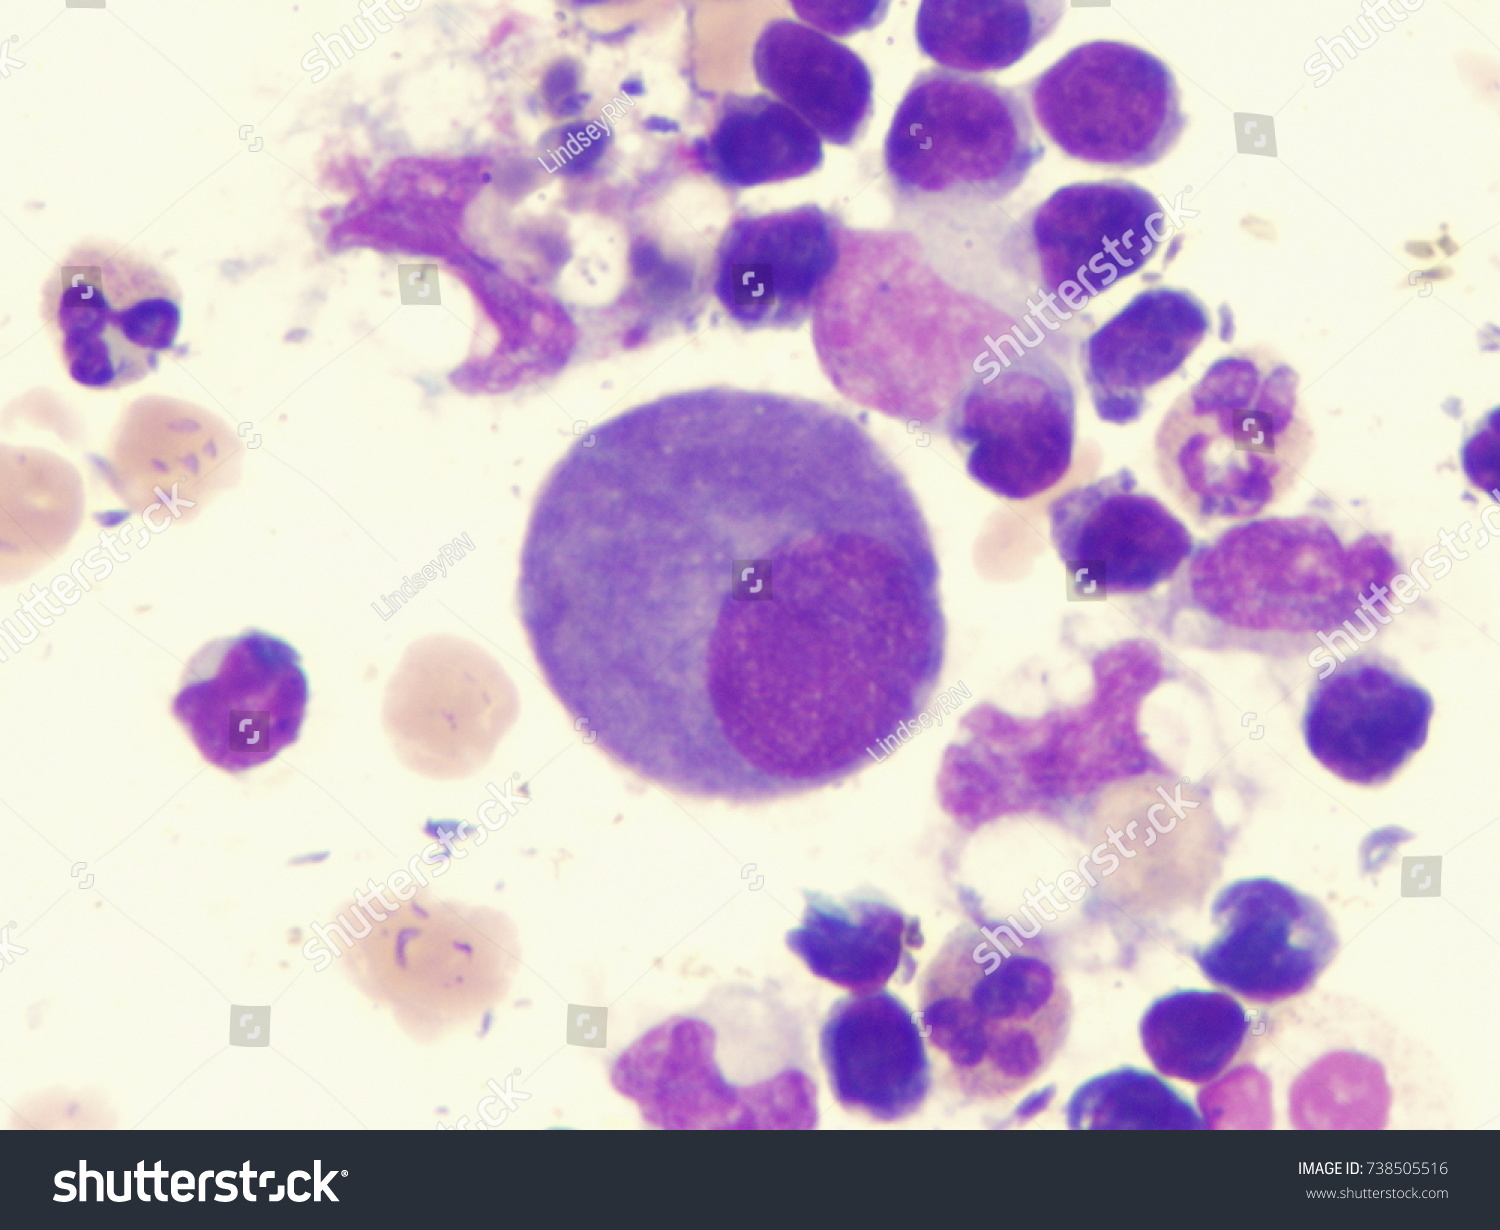 spindle cell tumors